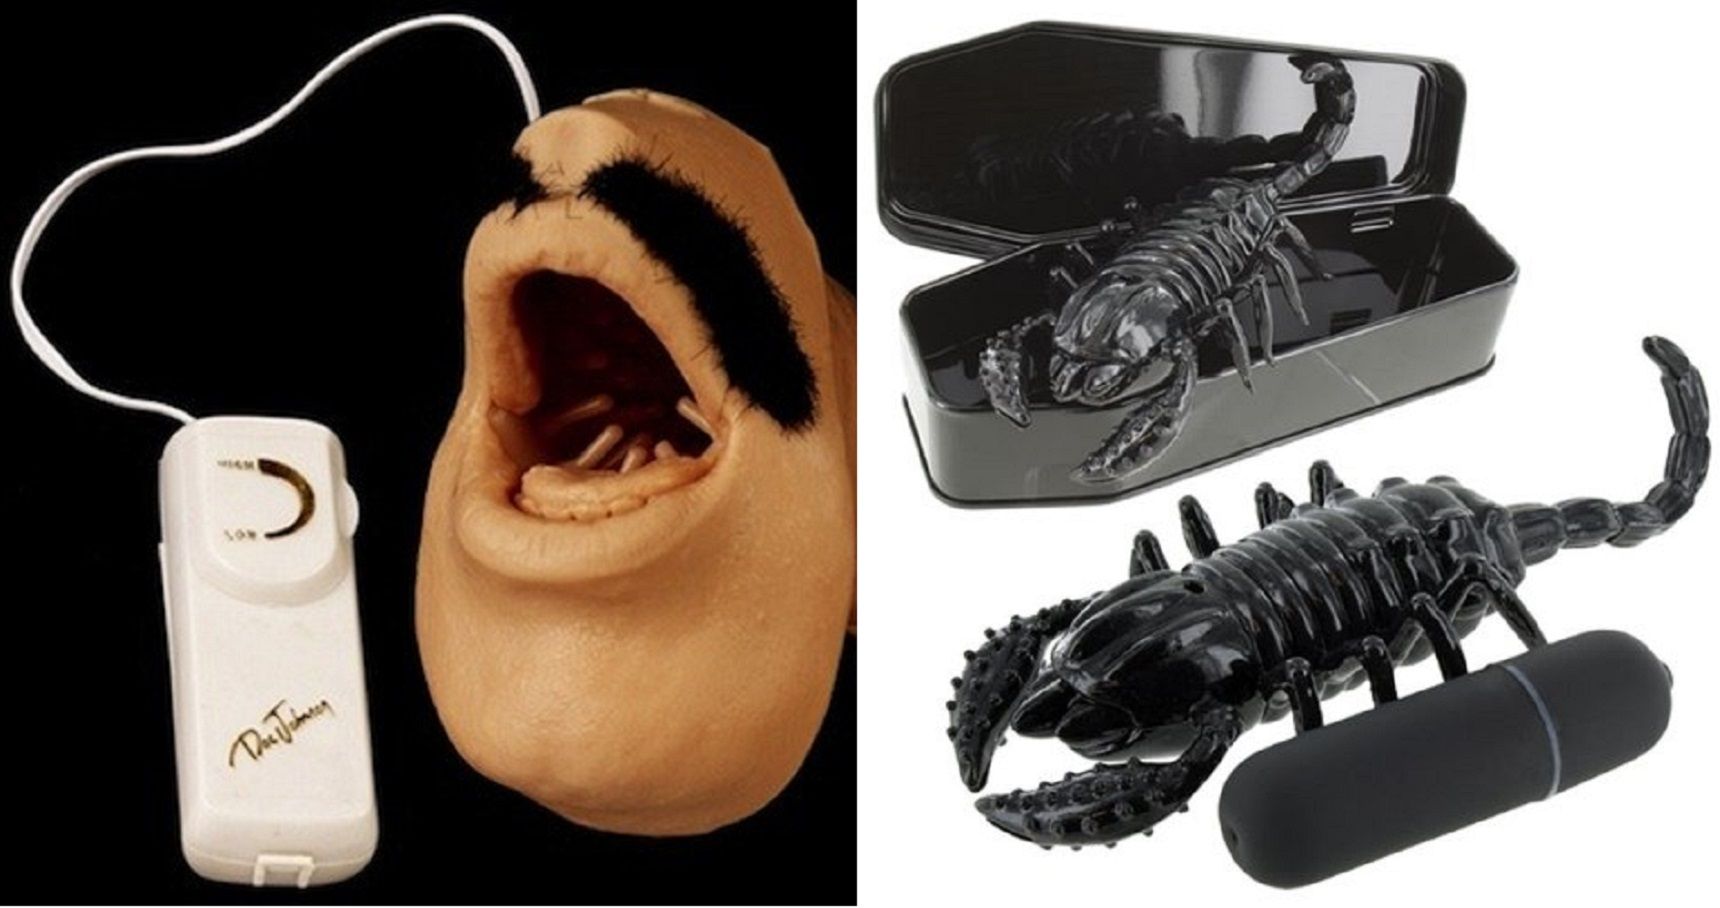 The 11 Craziest Adult Toys You Won\u0026#39;t Believe Exist | TheRichest